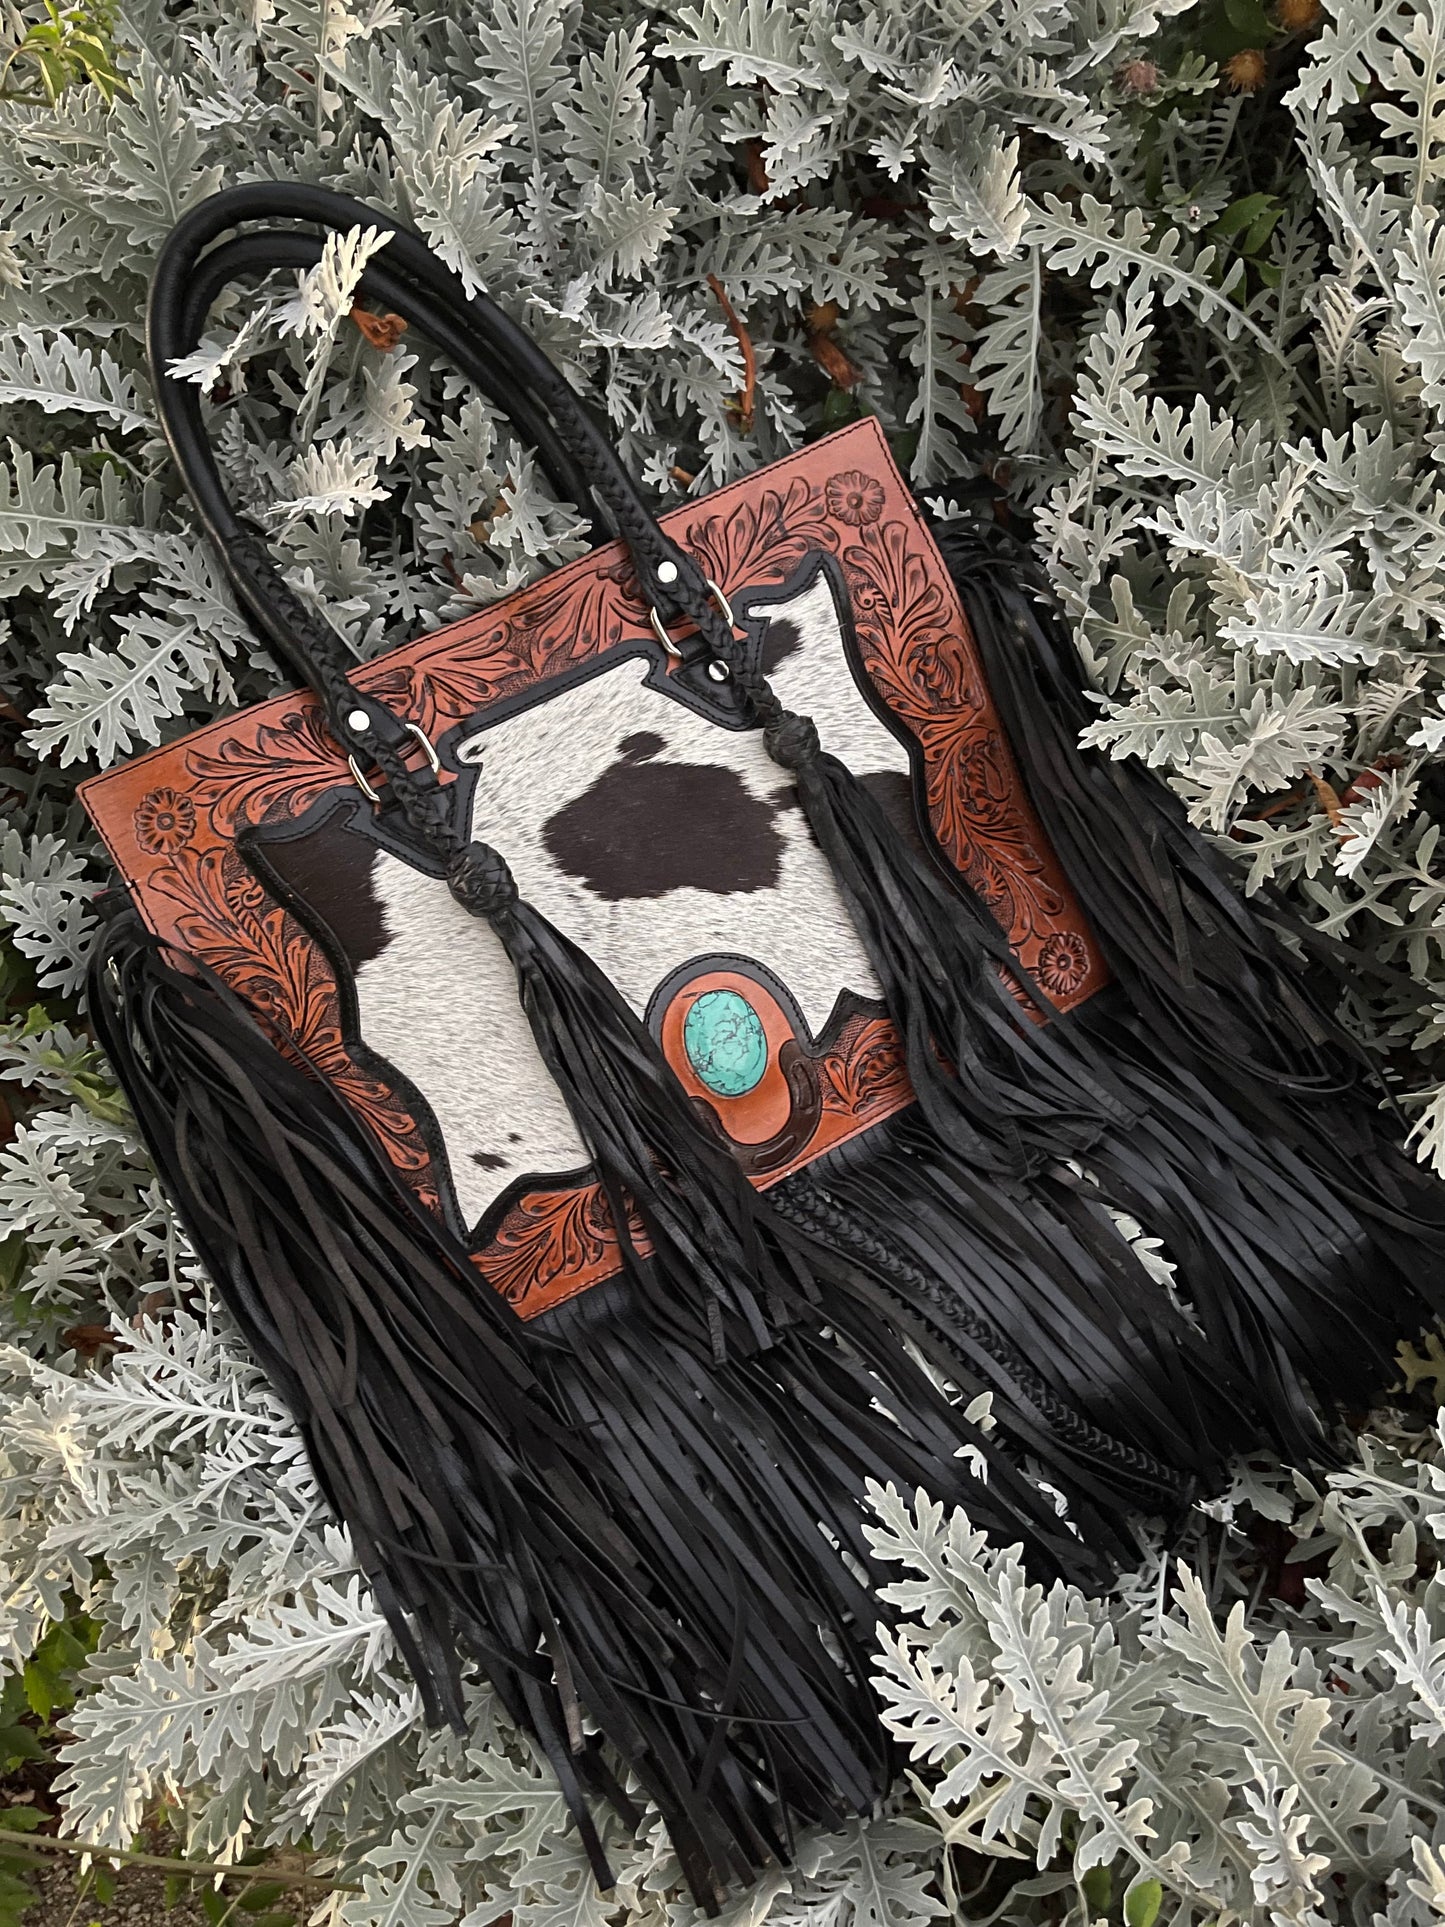 Pre Order The Nashville Gunner (With Fringe) a Haute Southern Hyde by Beth Marie Exclusive